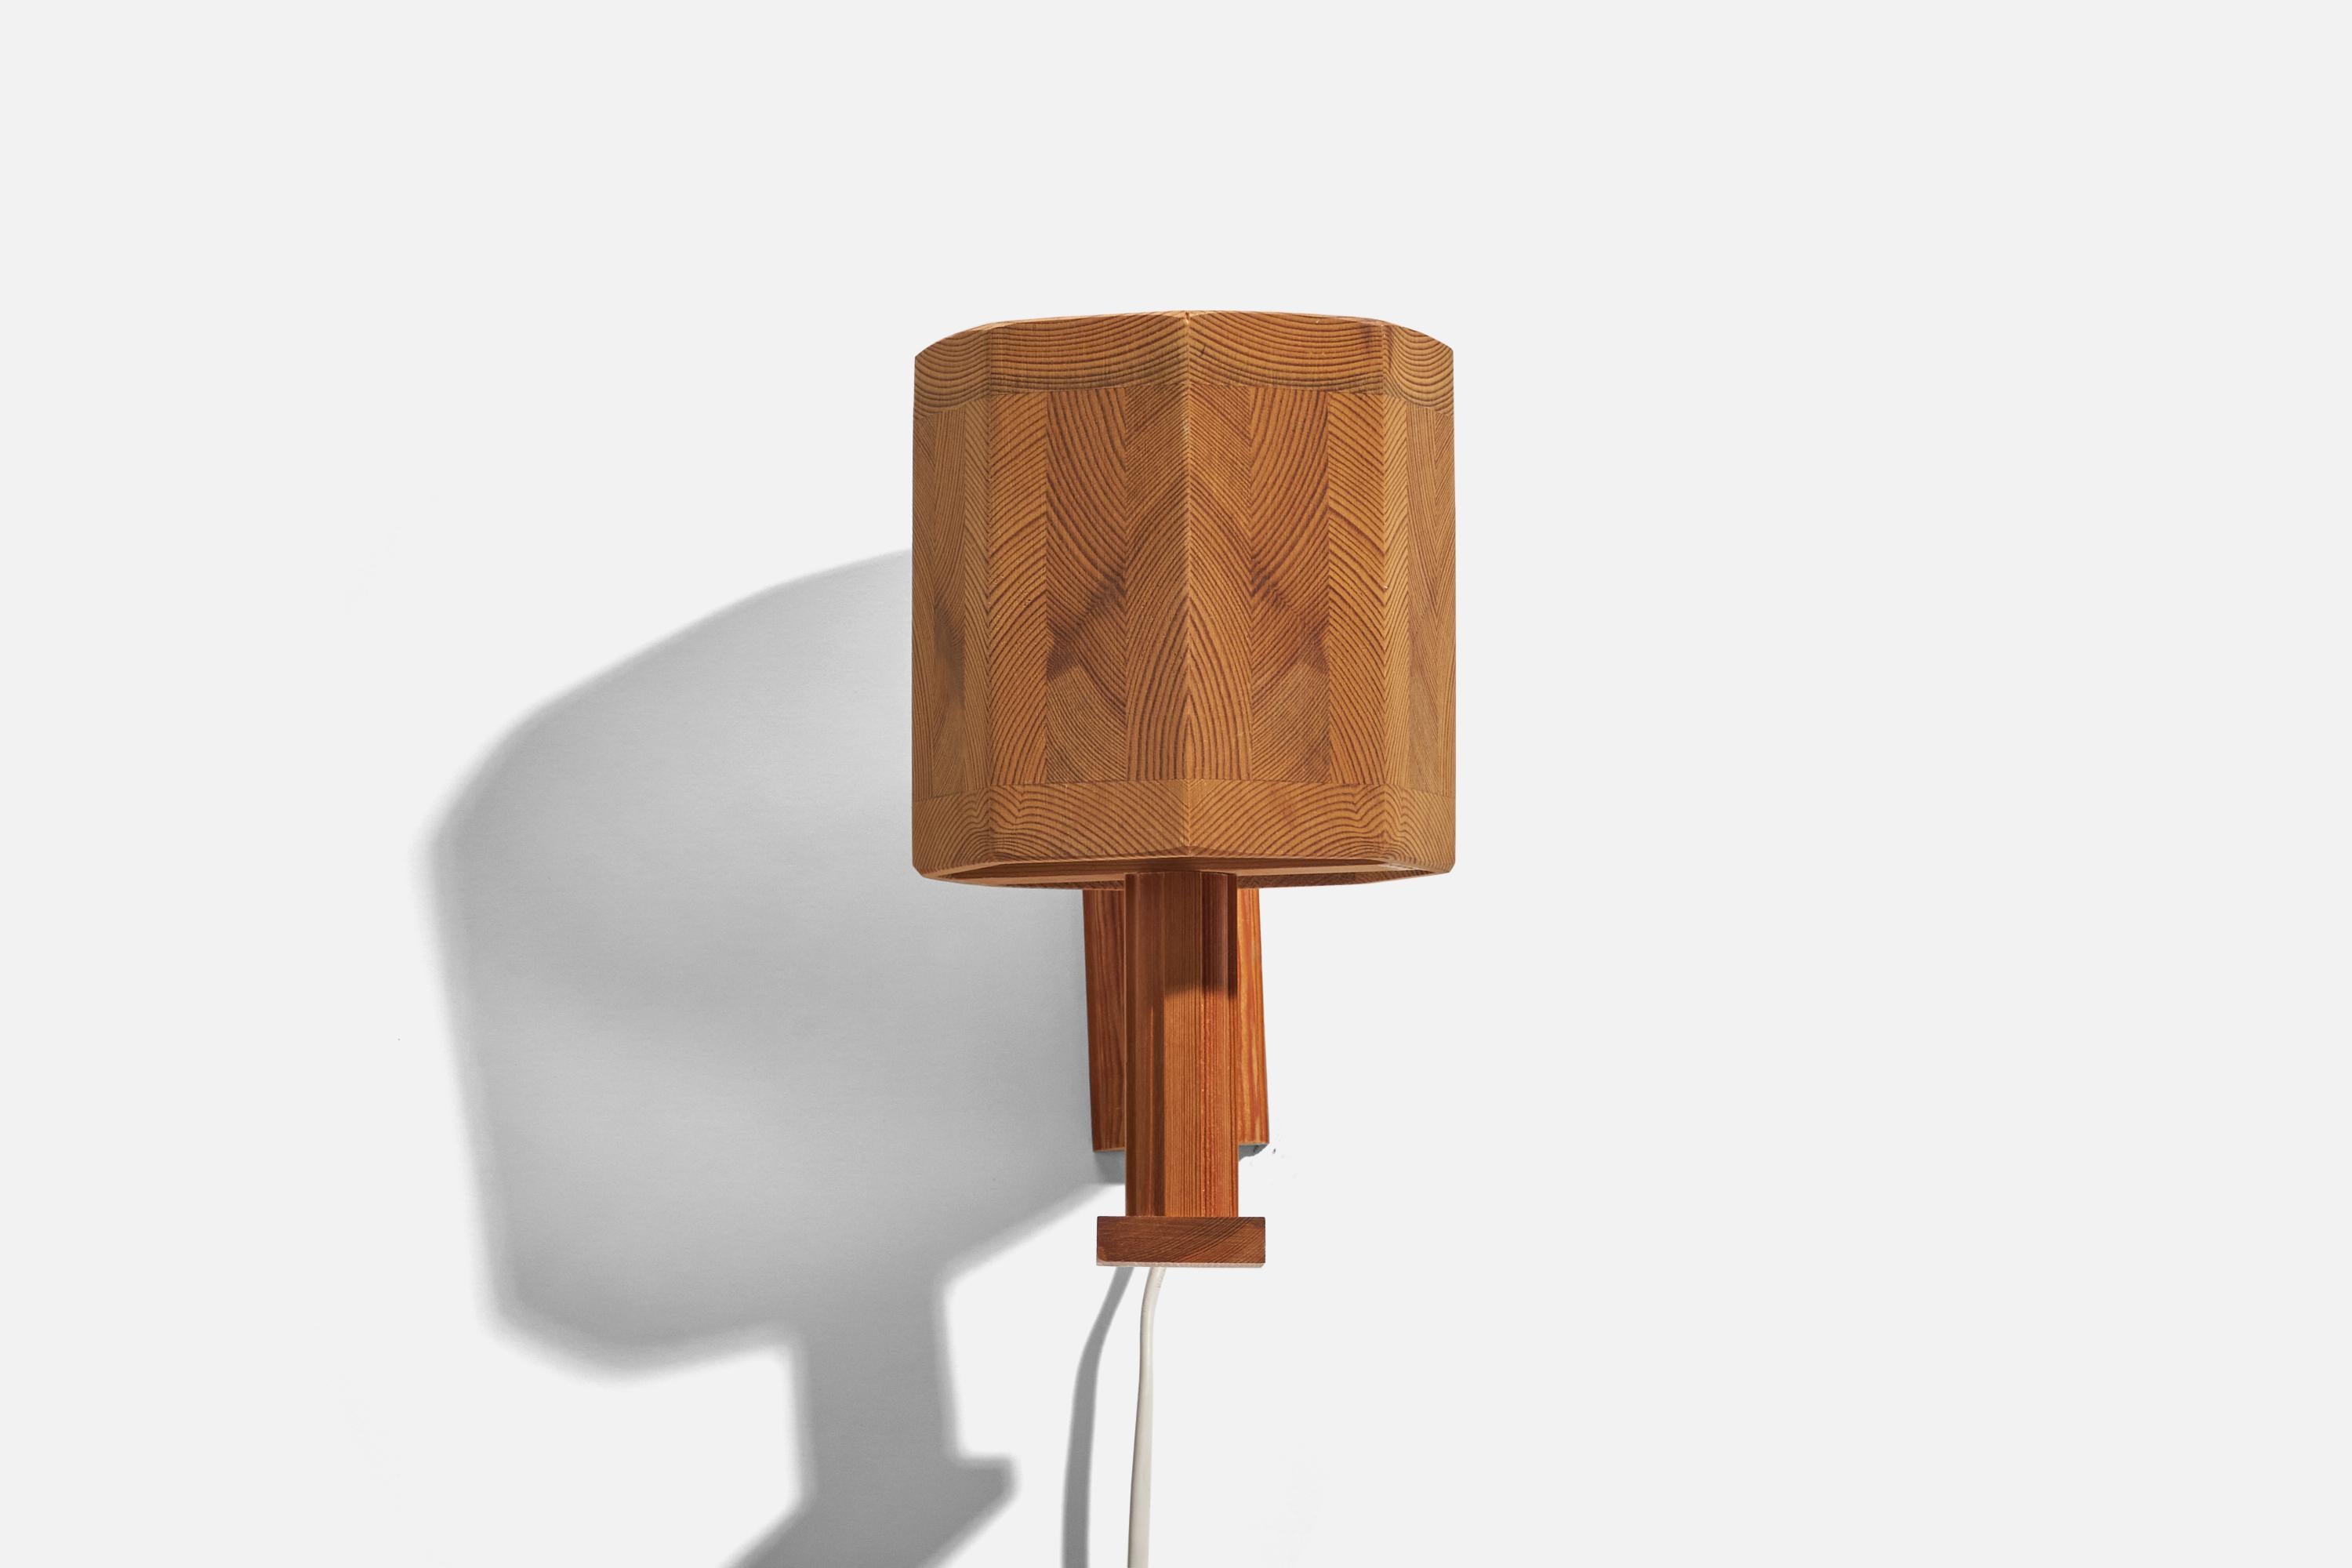 A pine sconce designed and produced in Sweden, 1970s. 

Dimensions of Back Plate (inches) : 4.94 x 1.79 x 0.54 (Height x Width x Depth)

Socket takes standard E-26 medium base bulb.

There is no maximum wattage stated on the fixture.